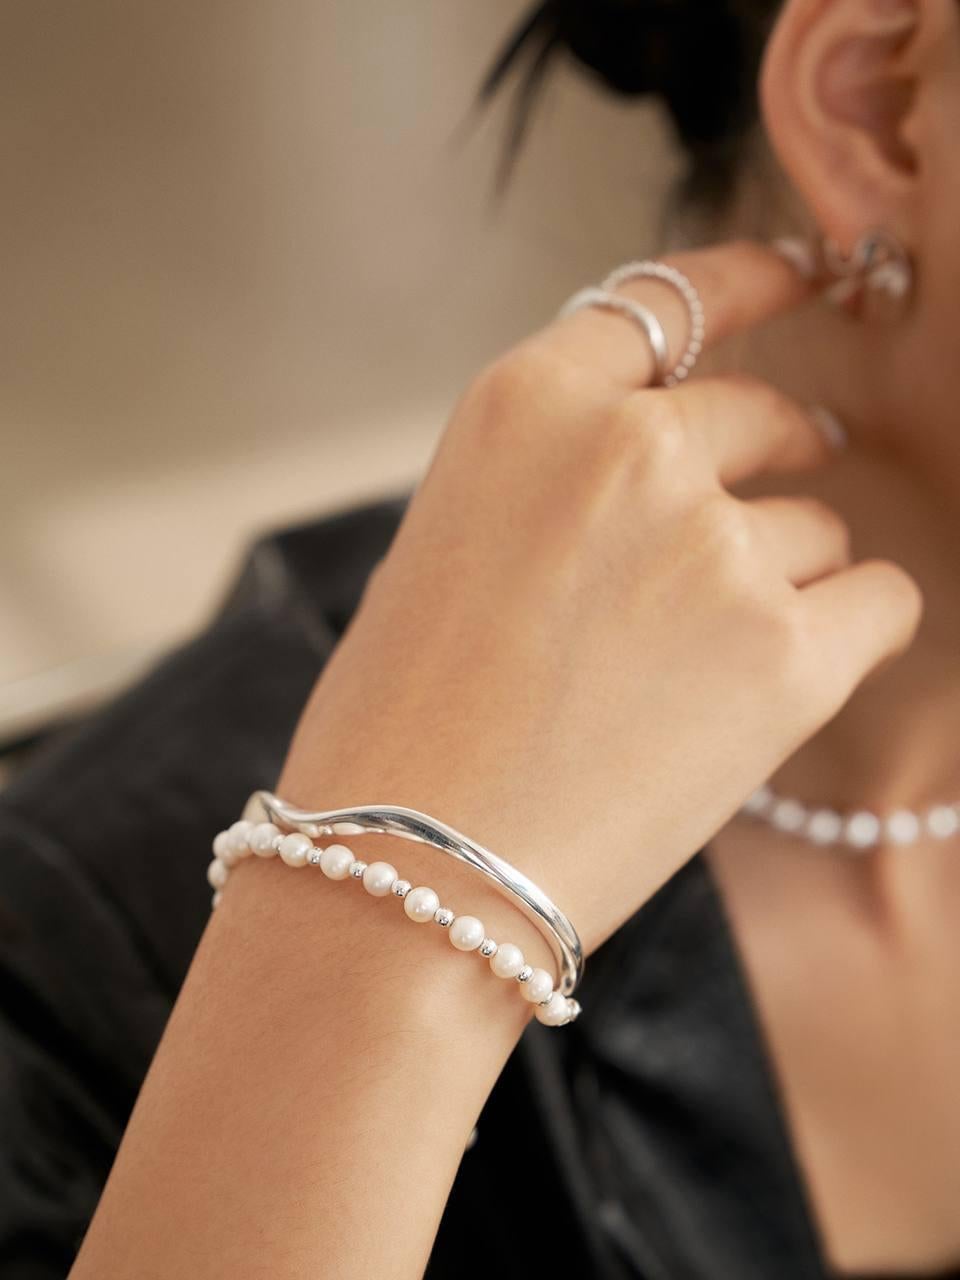 SKU: FT-0010
Material: 18K White-Plated Sterling Silver/ Natural Freshwater Pearls
Length: Approx. 17cm+3cm extension chain
Pearl Size: Each pearl is Approx 4 - 5mm
